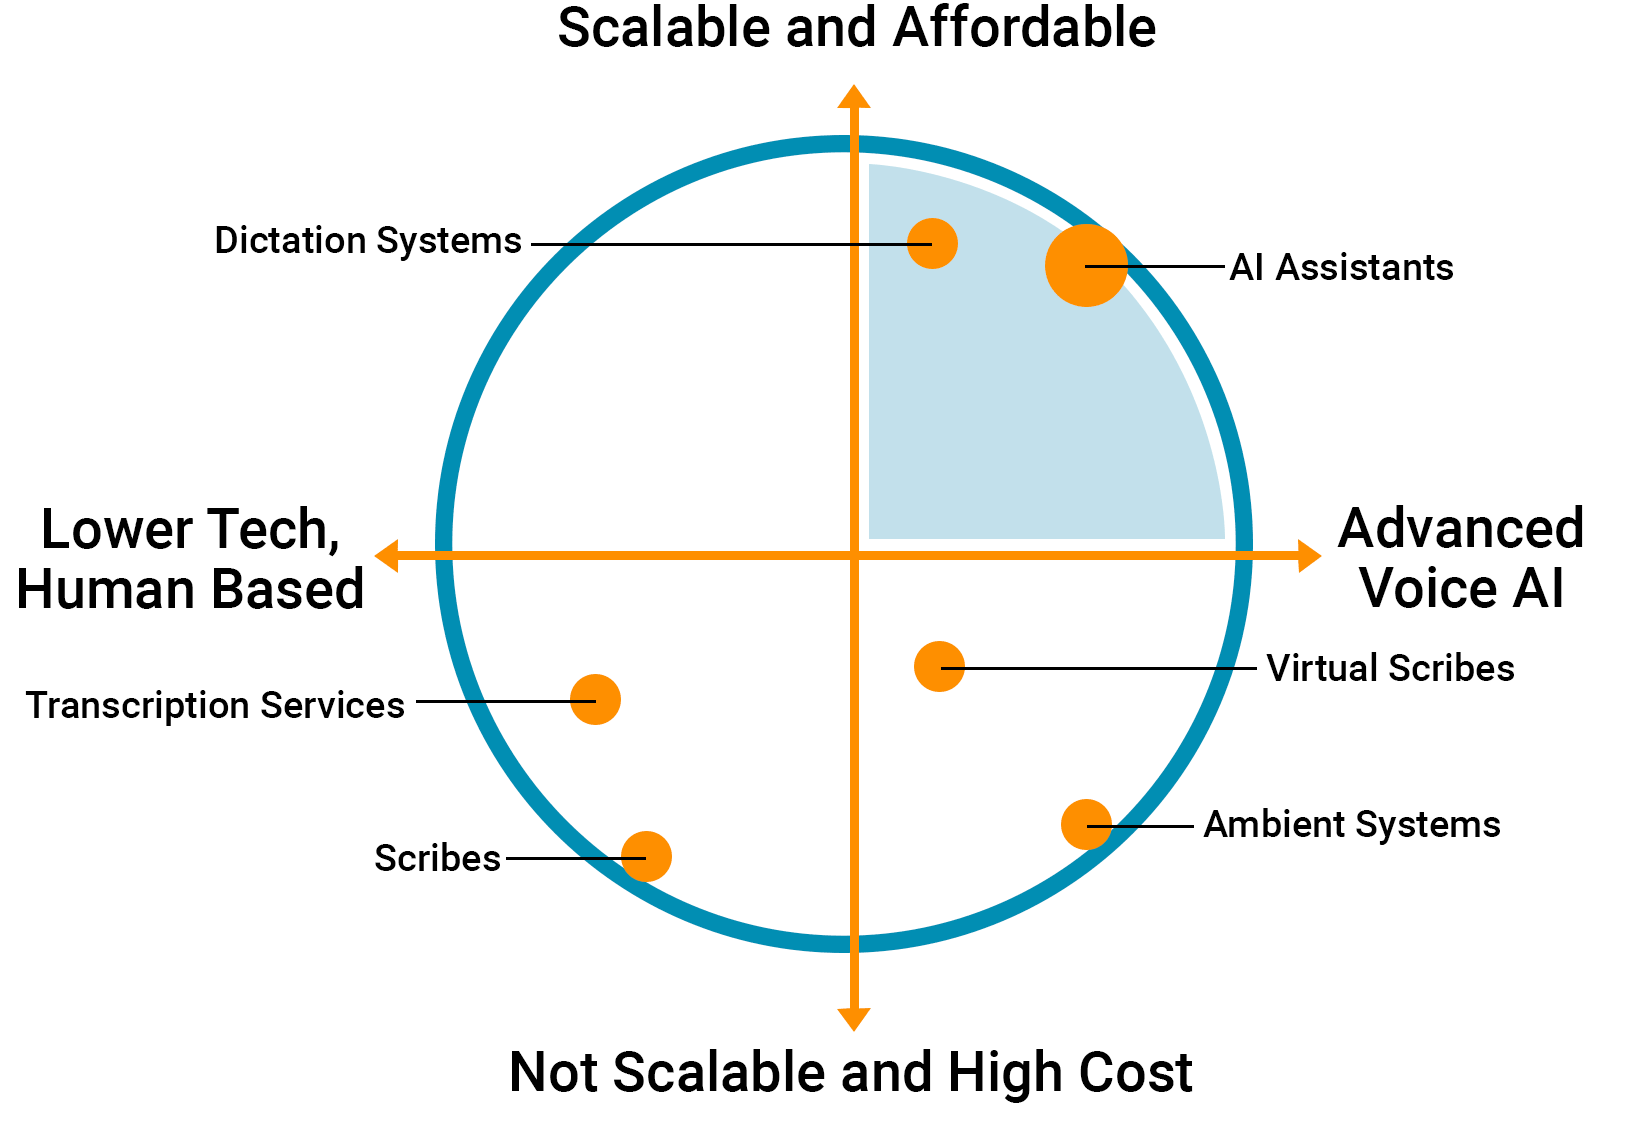 grid comparison: Scalable, Affordable, Advanced, Lower Tech